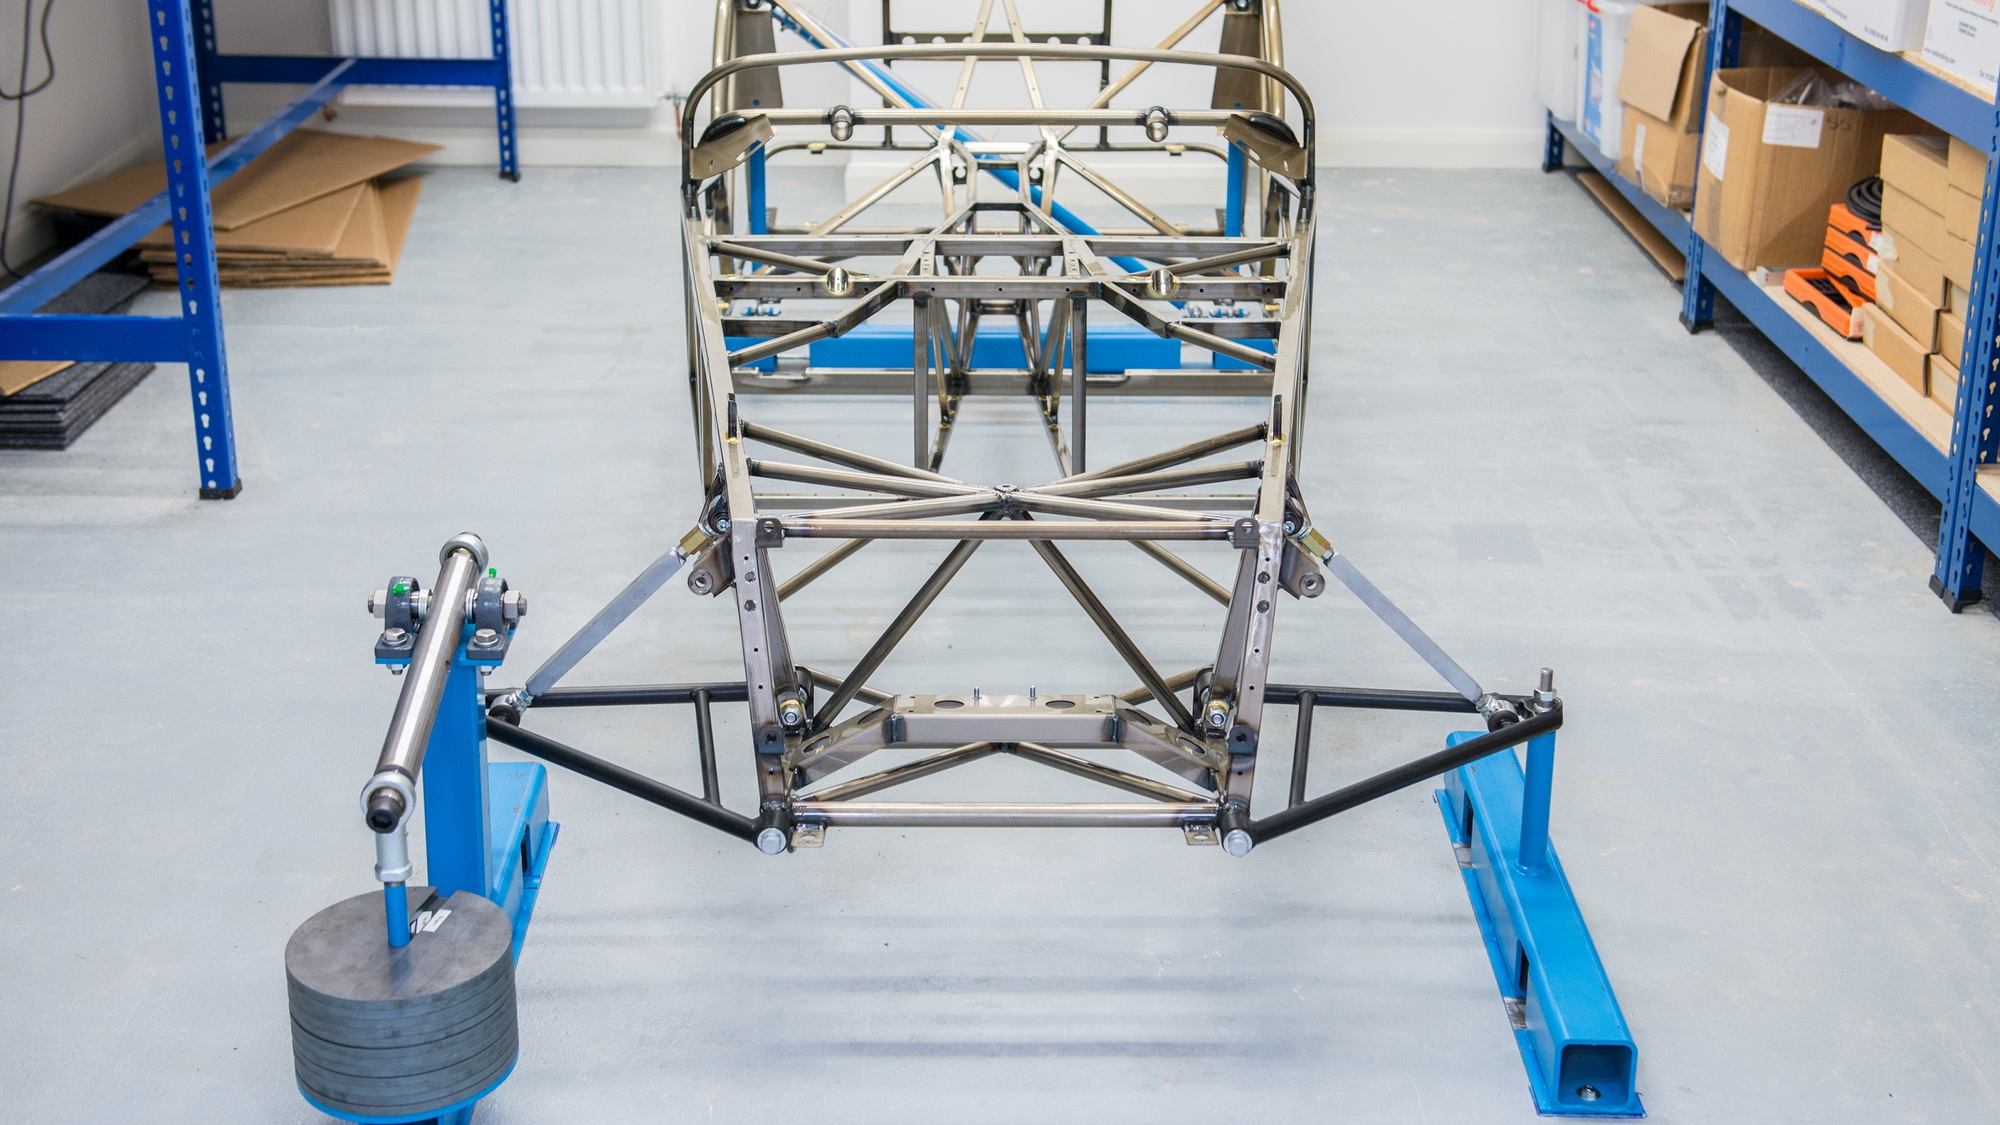 Caterham builds lighter Seven chassis using bicycle “butted tubing” technology